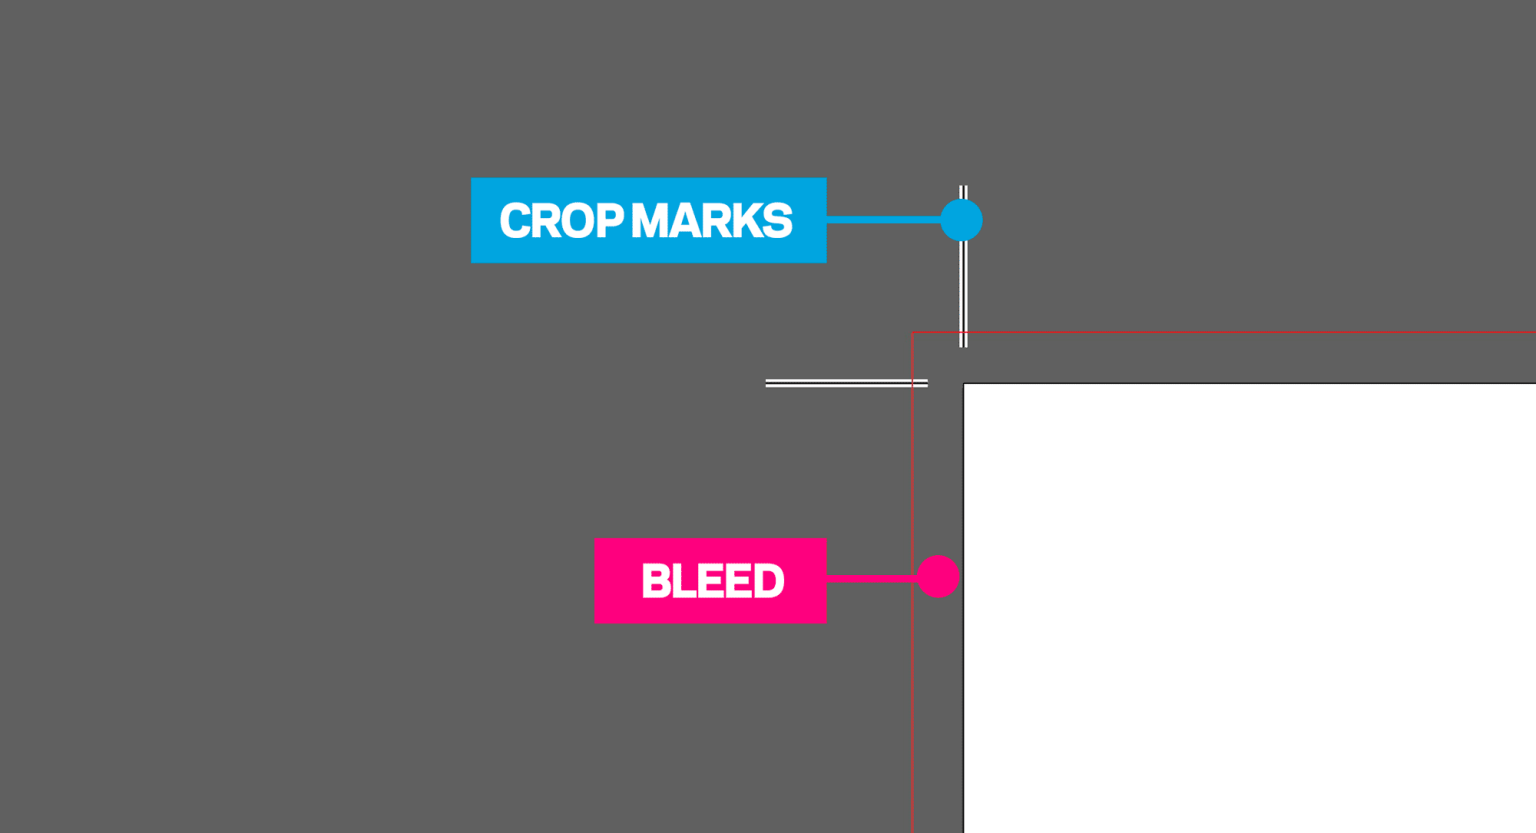 Apple Capital Print Management London | Diagram showing crop marks and bleed on an artboard.